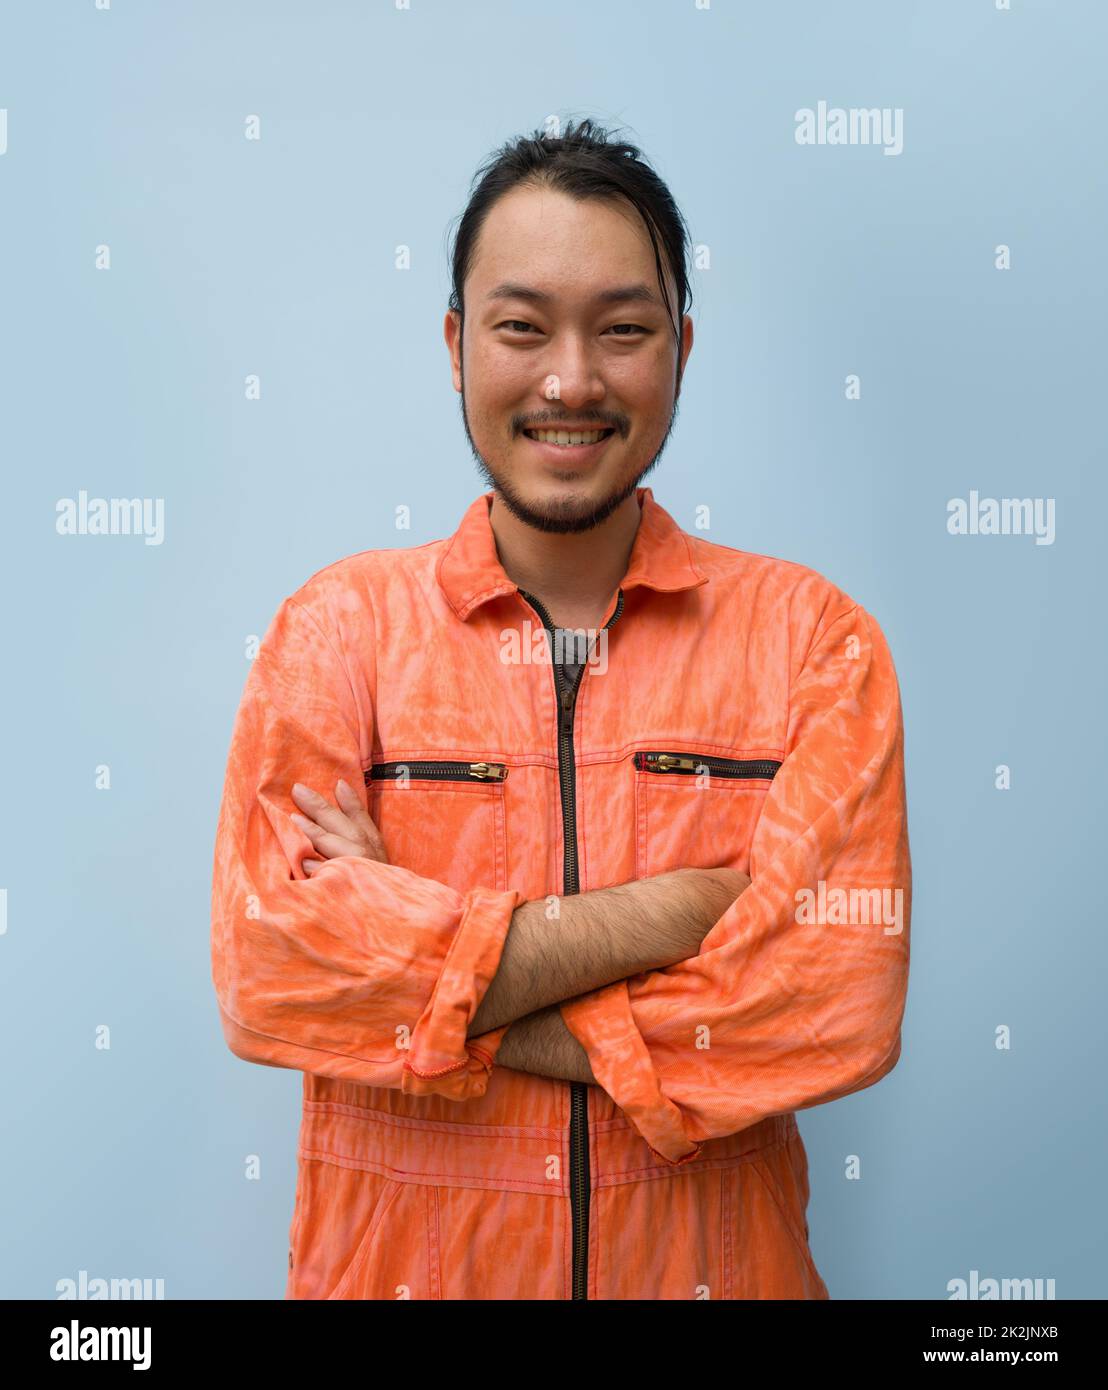 Young long hair asian man with mustache and beard stand smiling with his arms crossed. Portrait of industrial people on blue background. Stock Photo